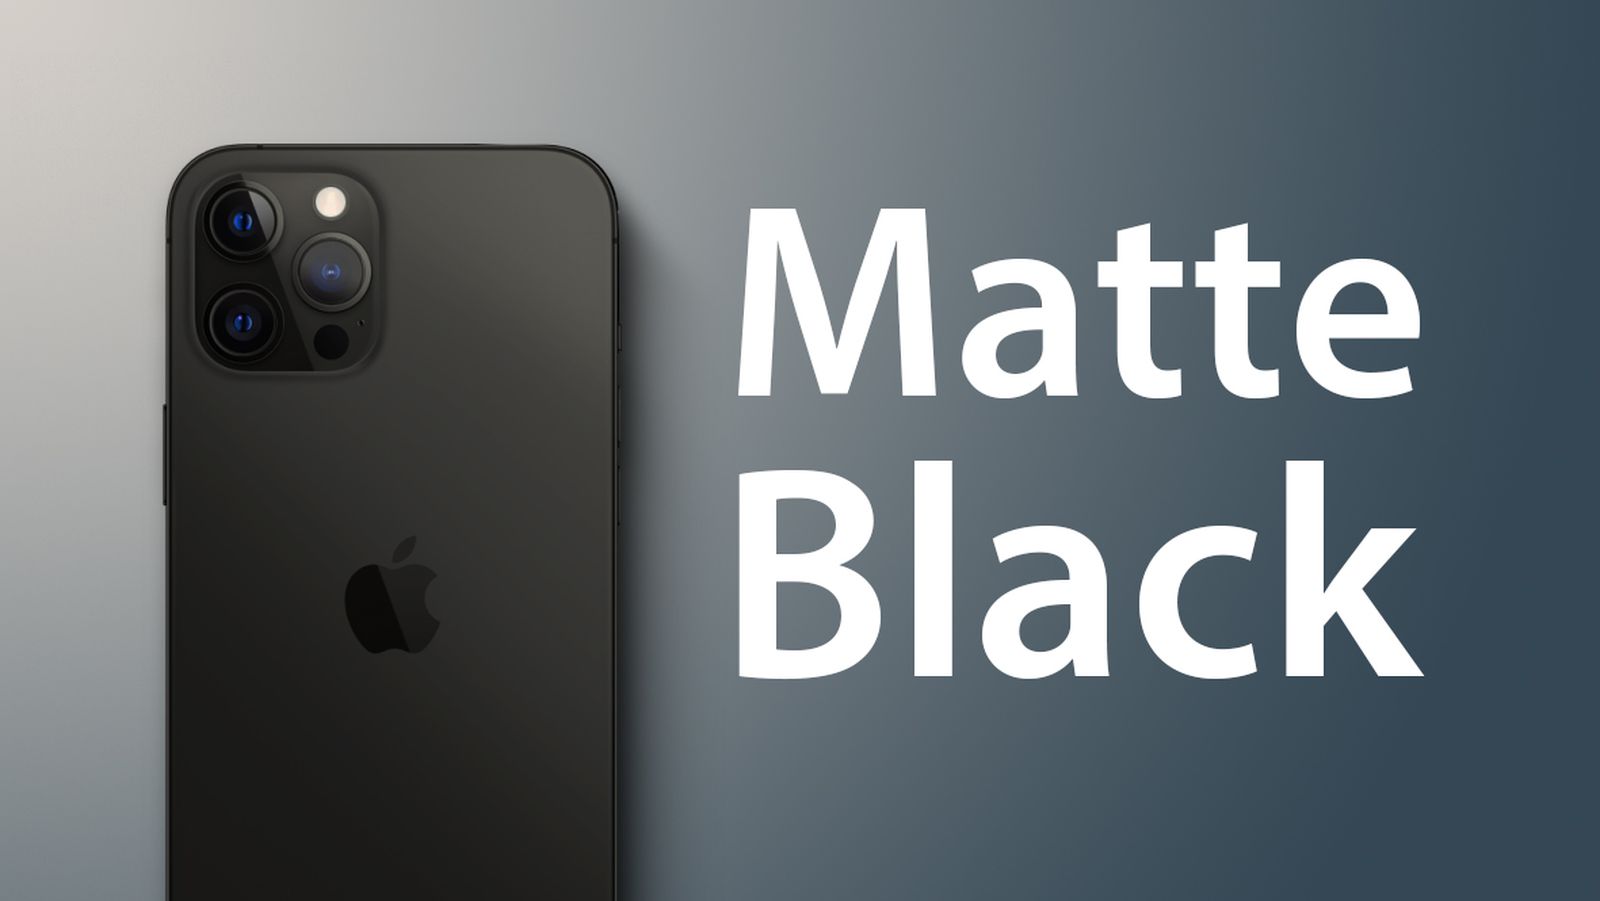 Iphone 13 Pro Lineup Rumored To Include Matte Black Option New Anti Fingerprint Coating For Stainless Steel Edges And More Macrumors